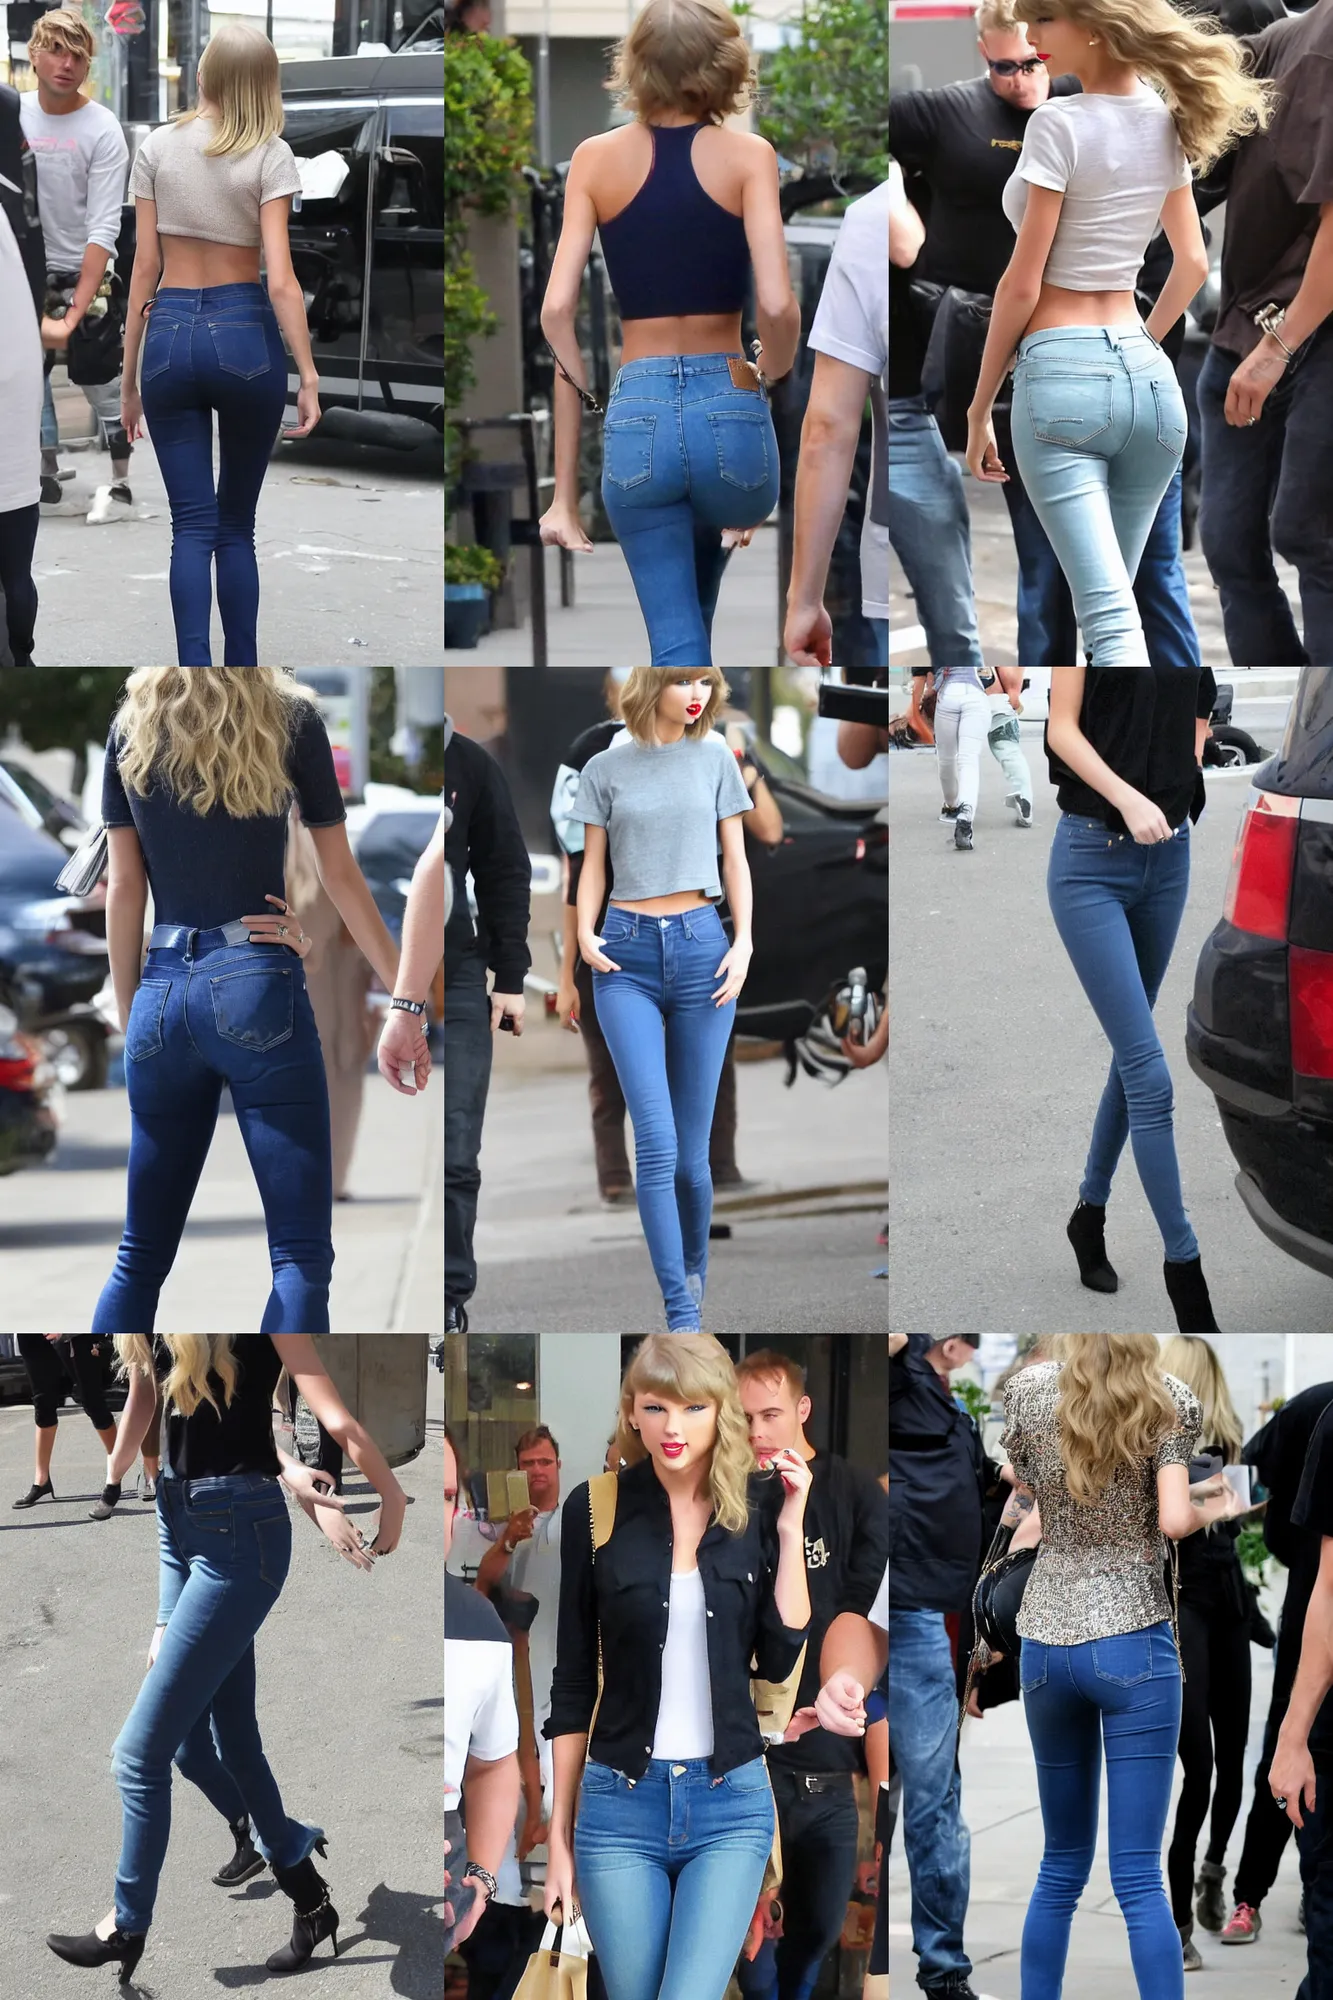 taylor swift in tight jeans, candid photo from behind